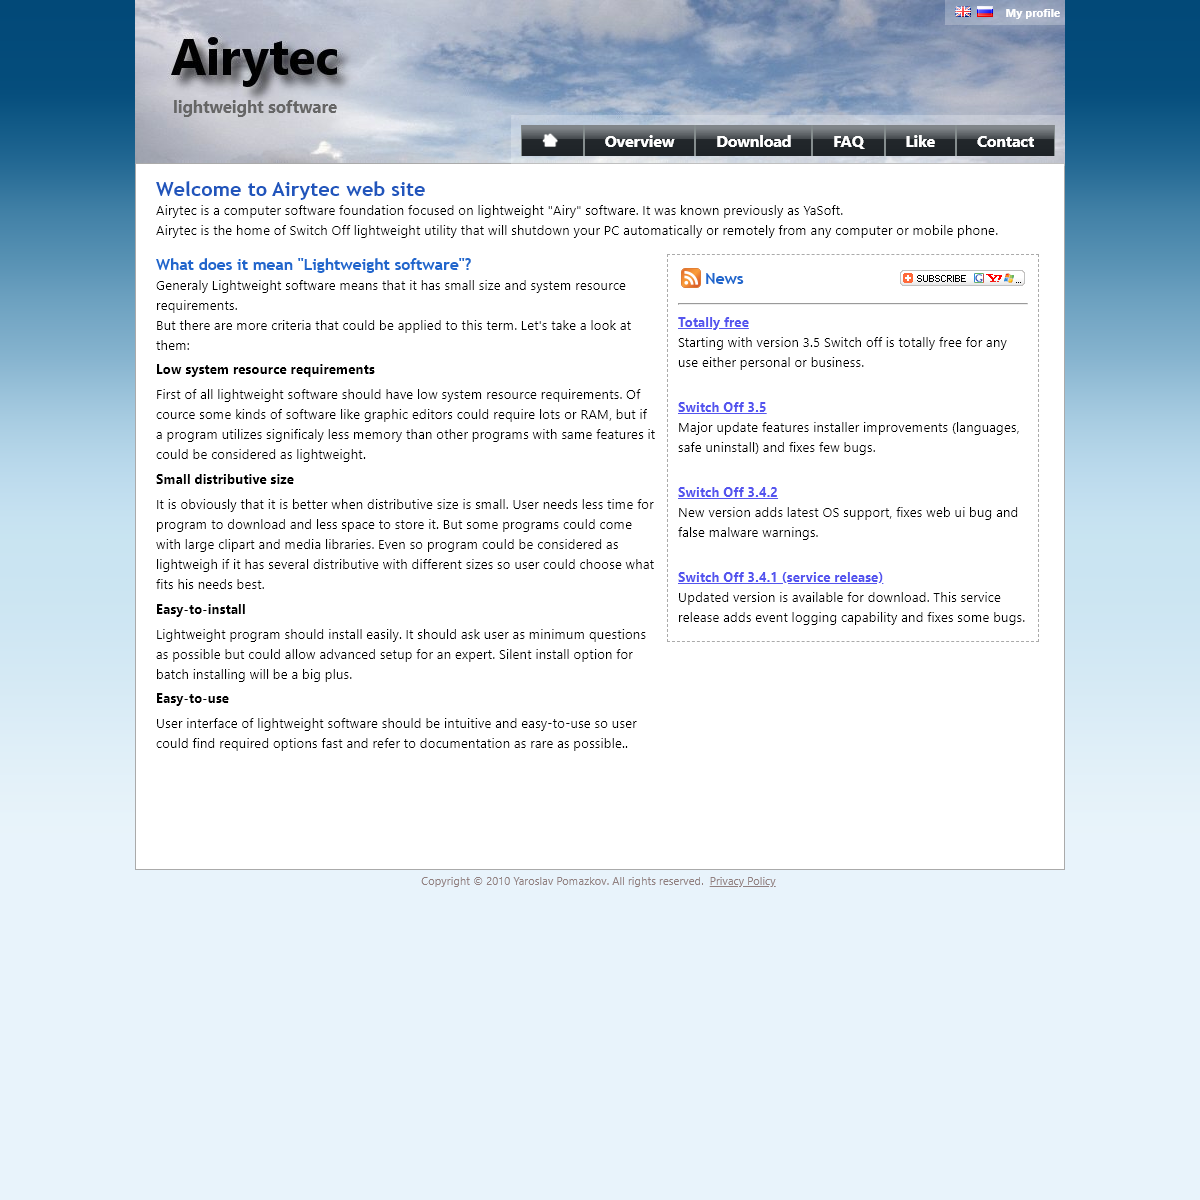 A complete backup of airytec.com